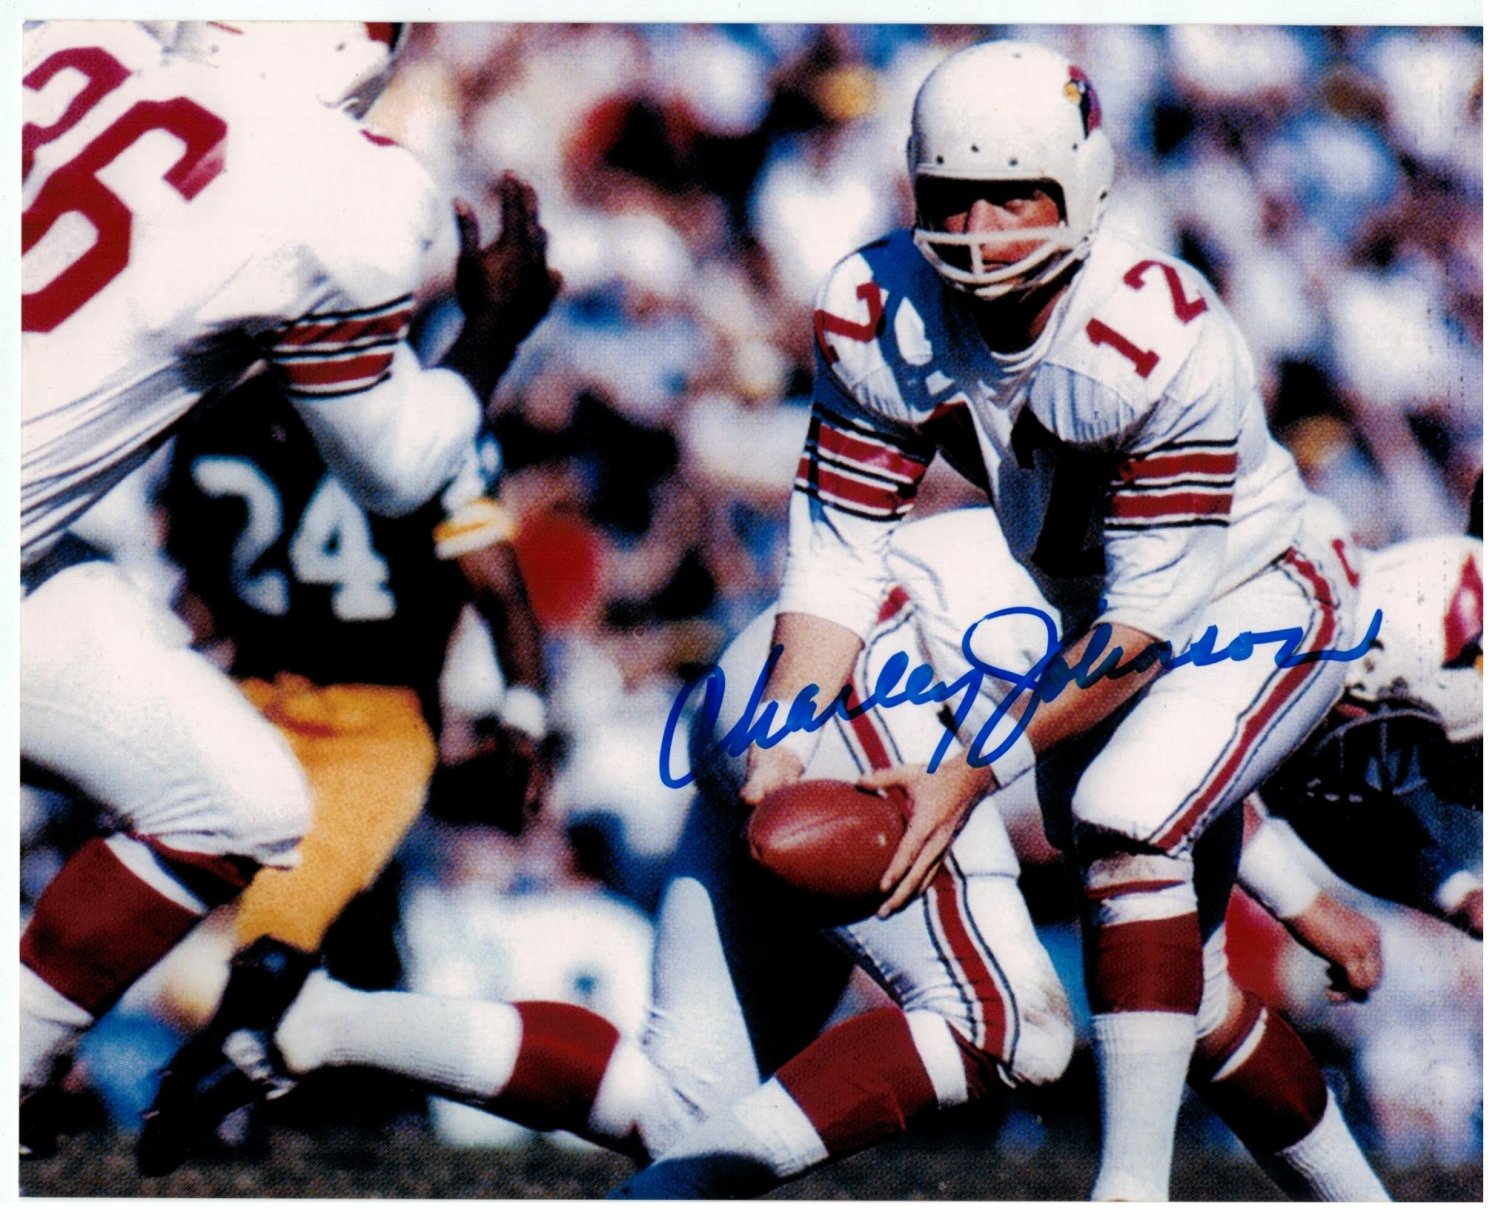 Charley Johnson St. Louis Cardinals (football) Autographed Signed 8x10 Photo